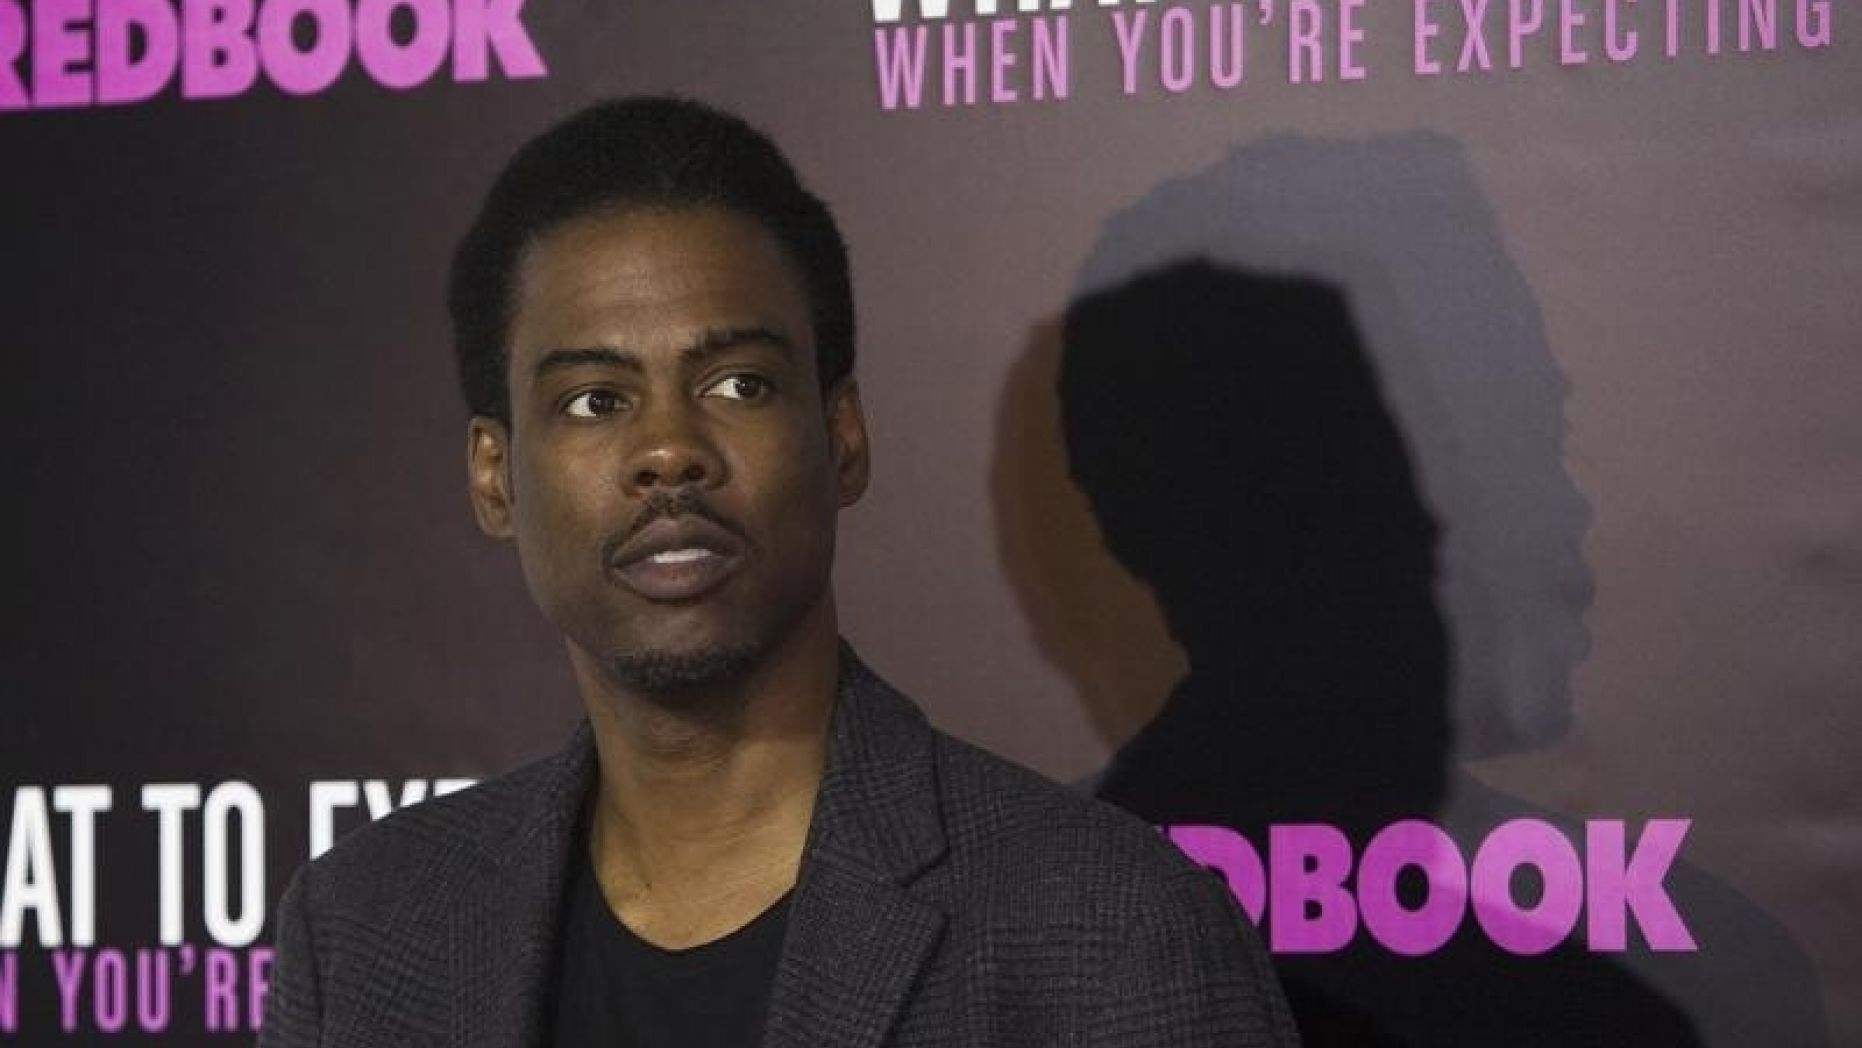 Chris Rock calls Trump a bully, jokes about police brutality in new Netflix special